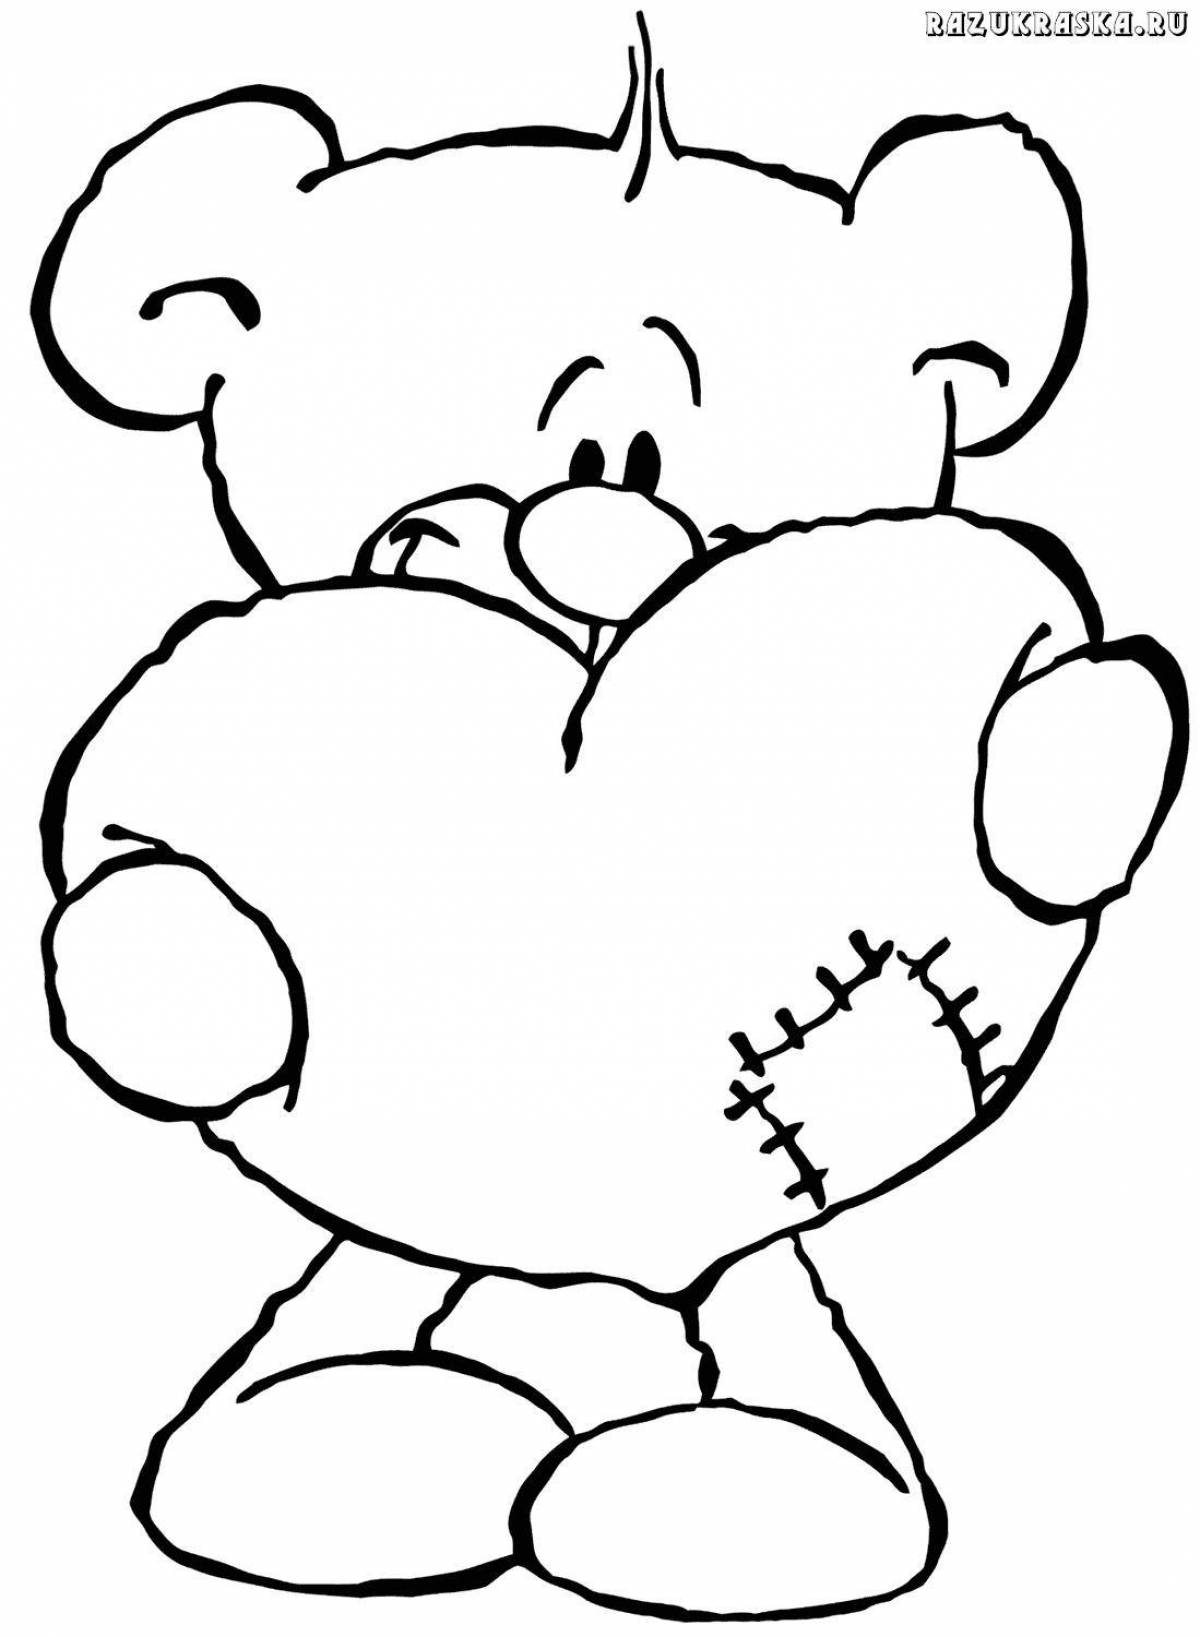 Funny teddy bear with heart coloring book